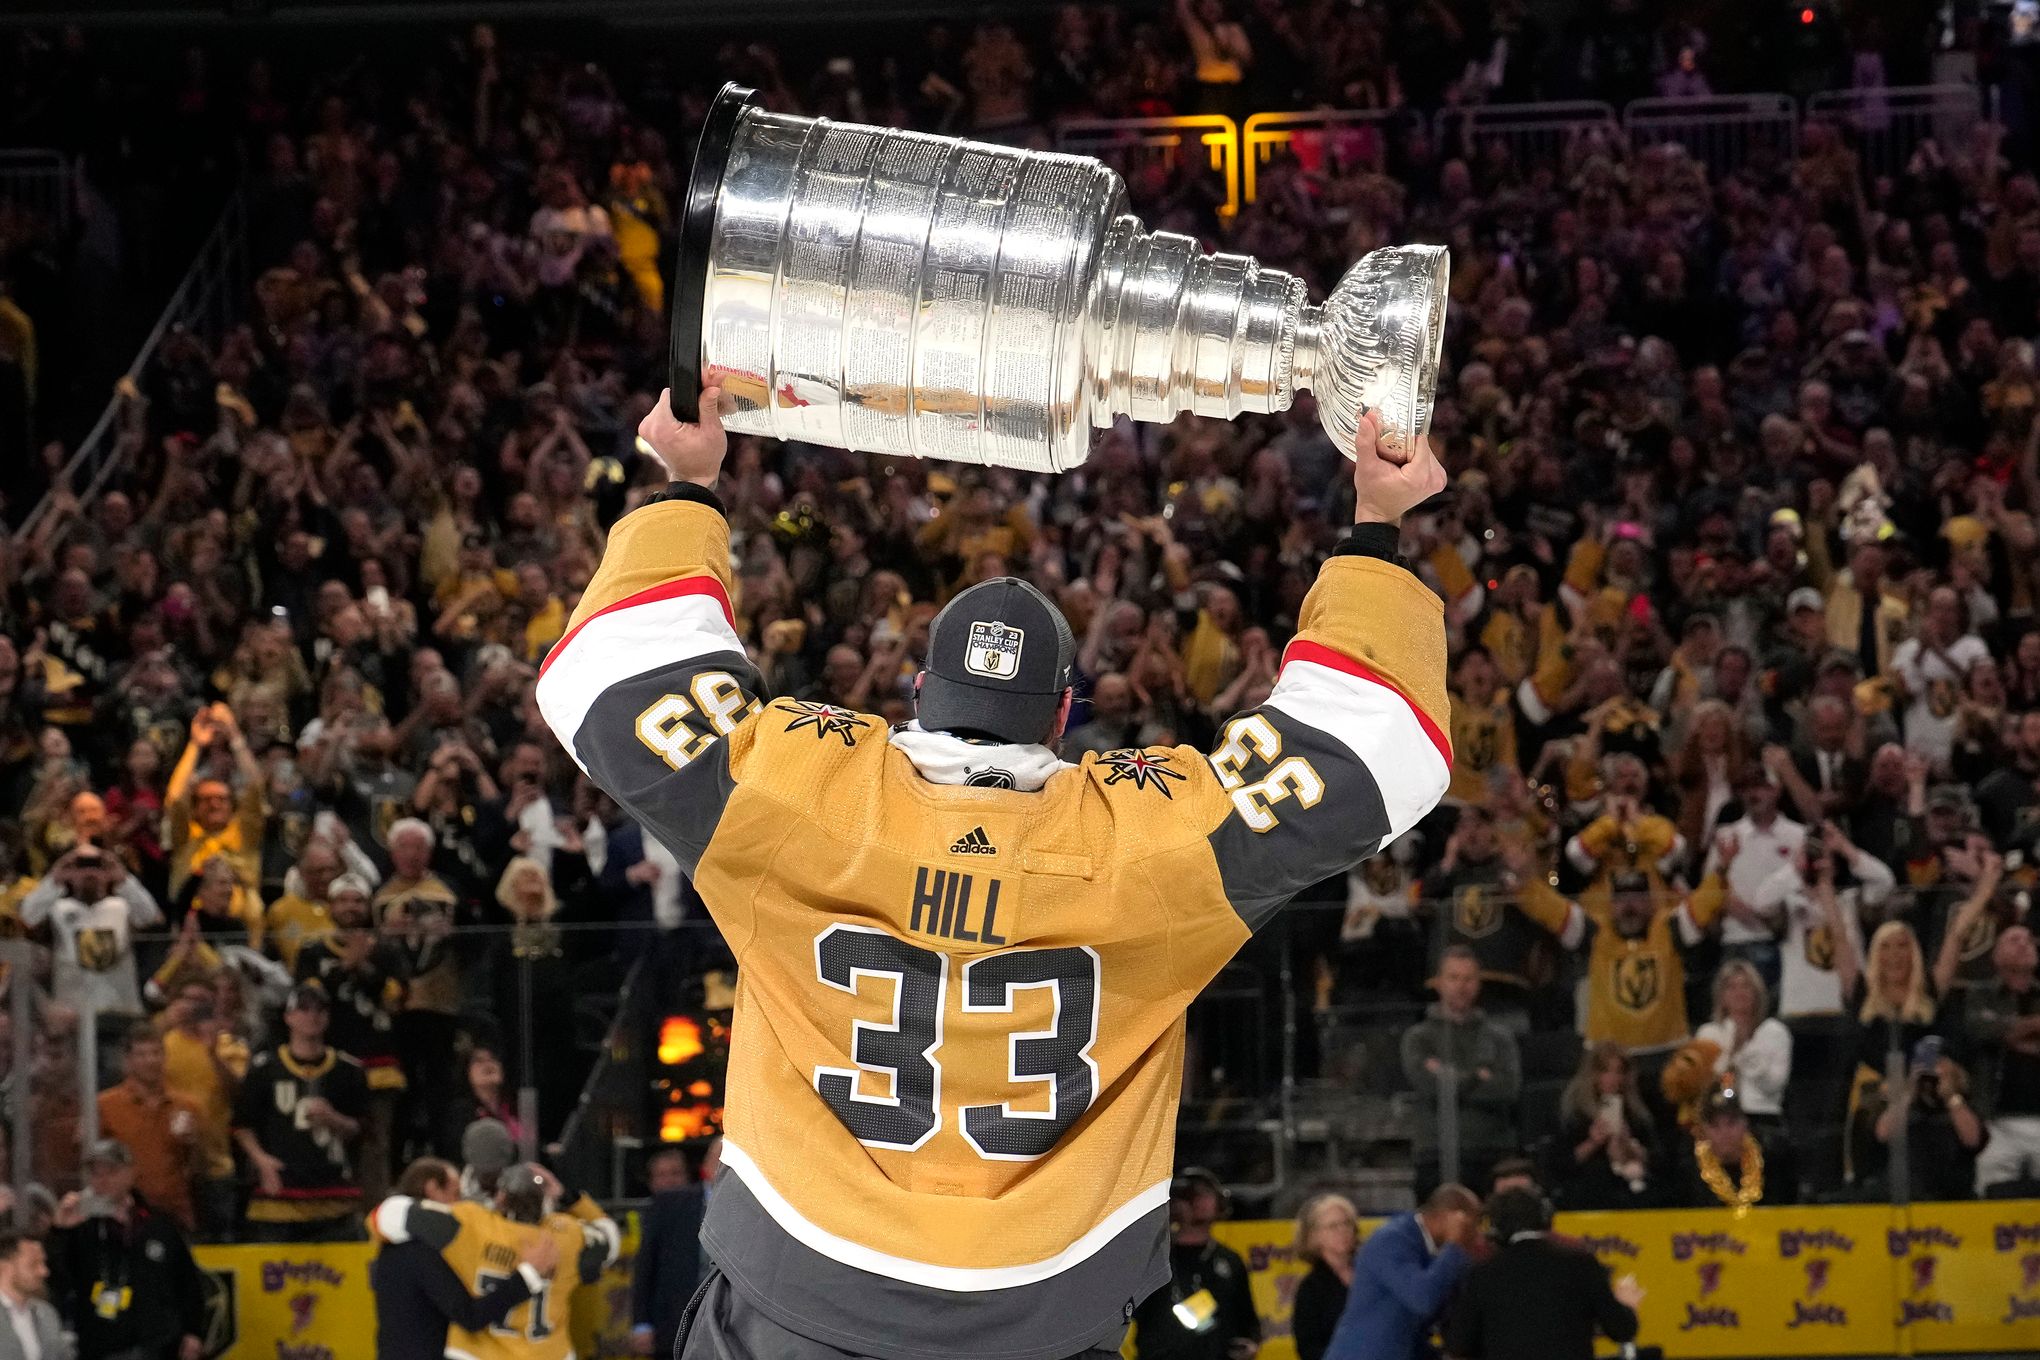 Top-selling Item] Adin Hill 33 Vegas Golden Knights Stanley Cup